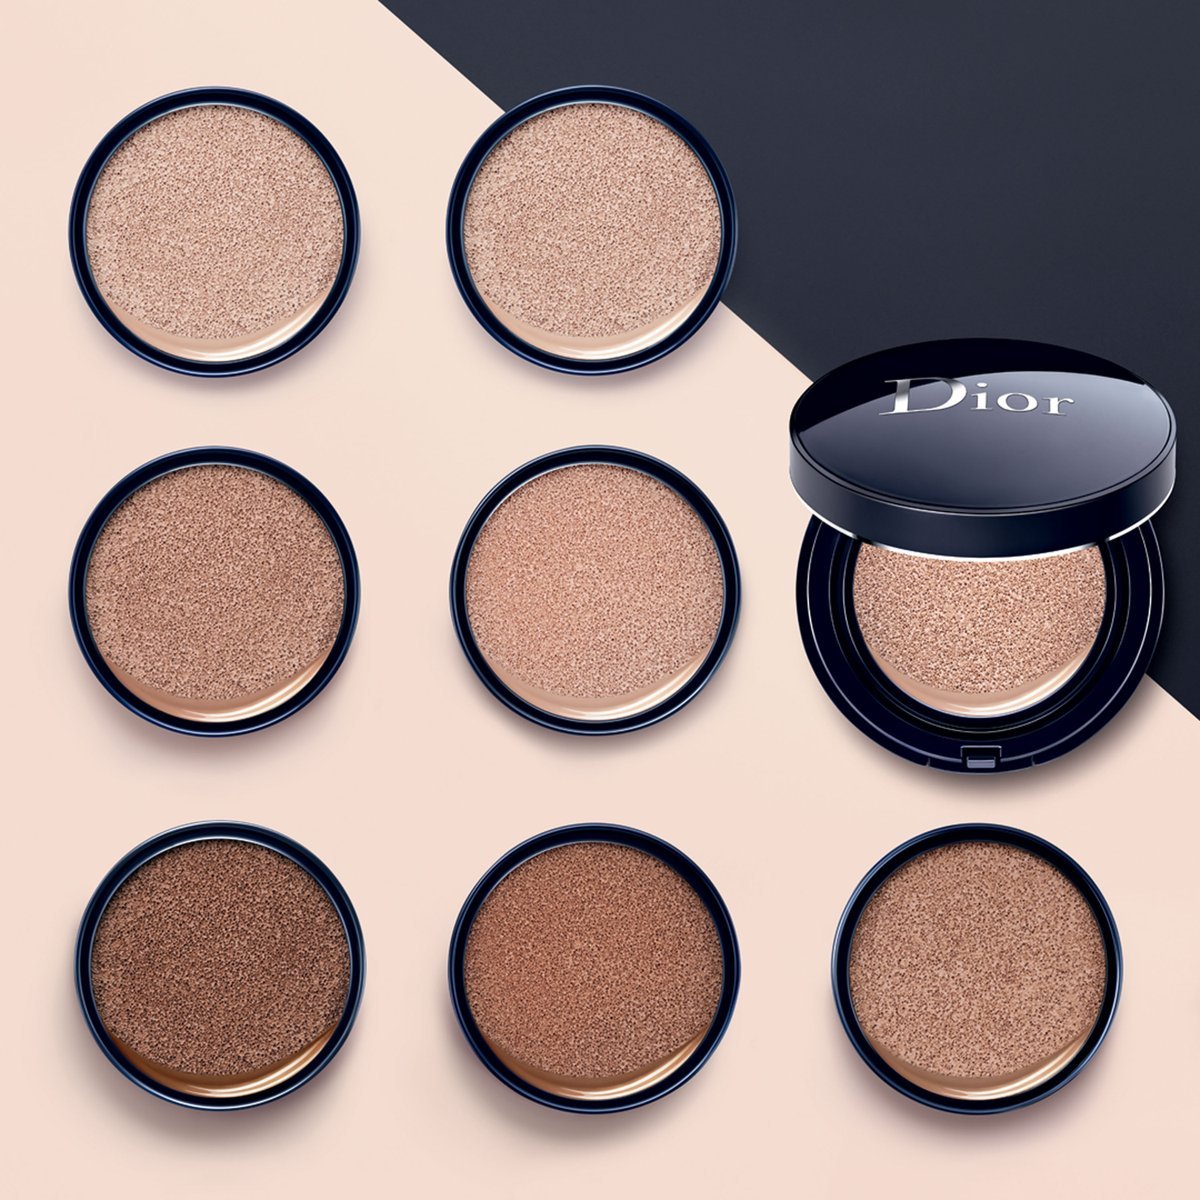 diorskin forever perfect cushion foundation spf 35